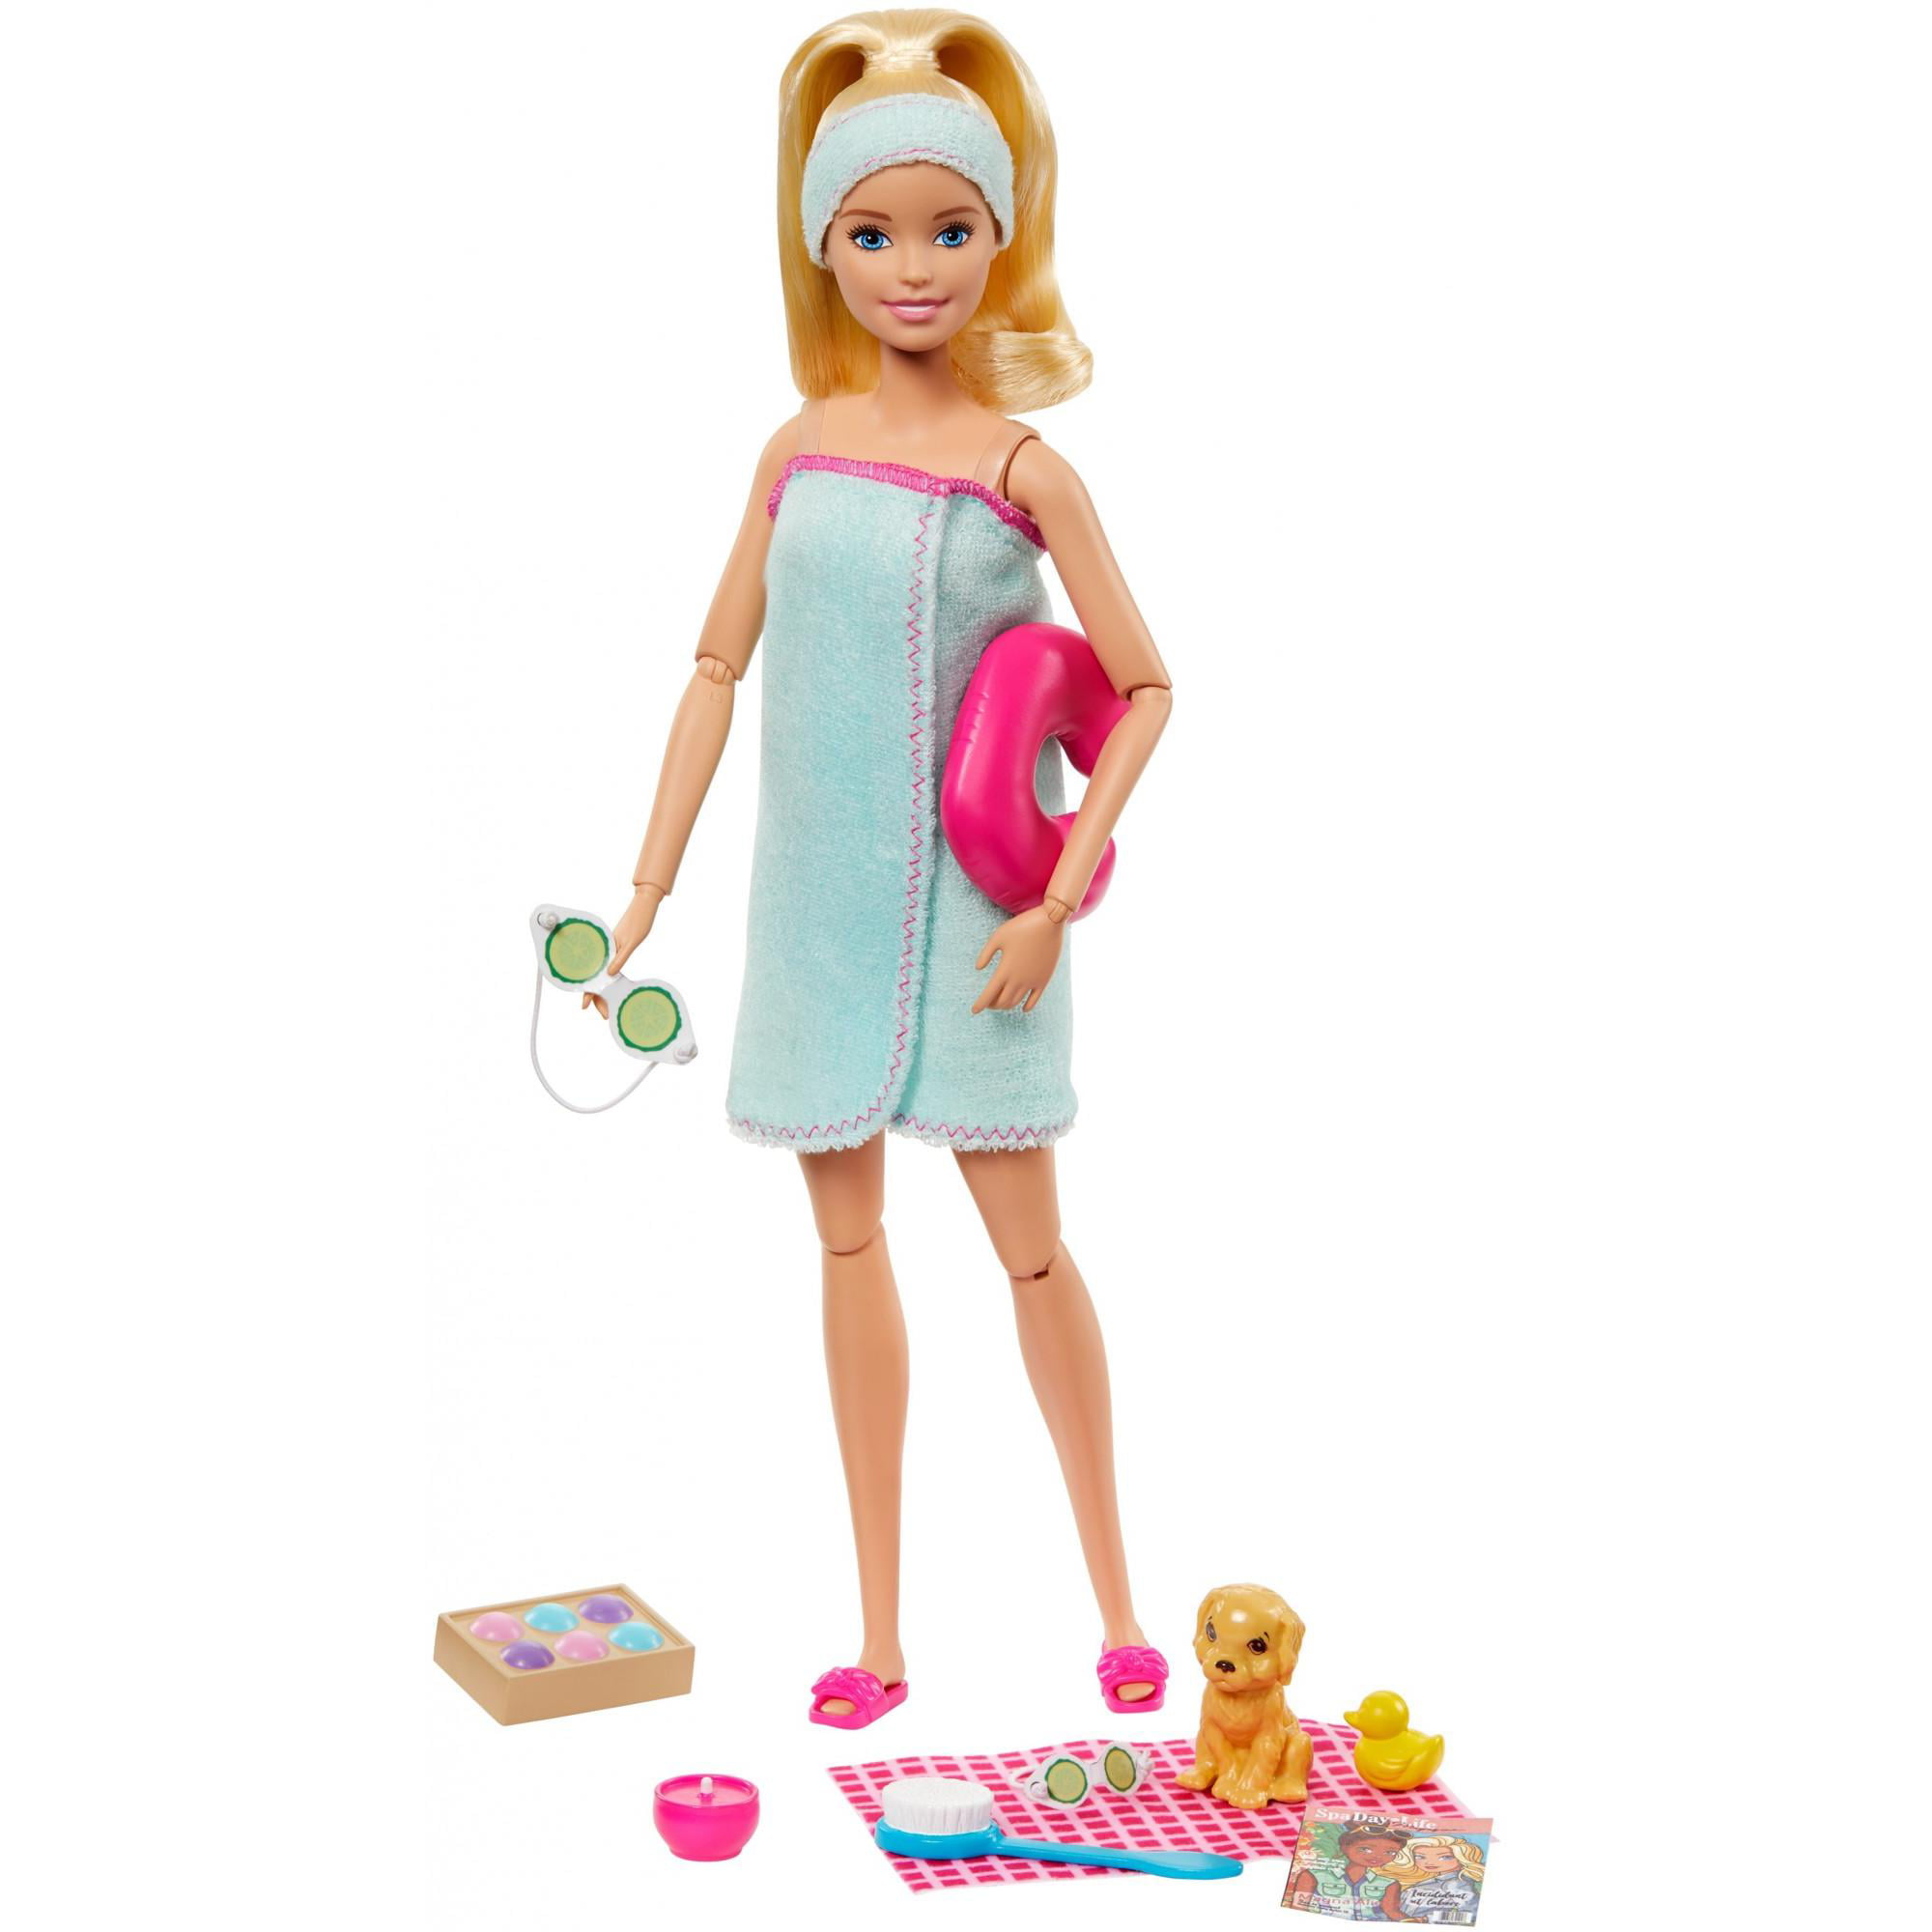 Timmy Steffi brother like Barbie with dog backpack and accessories 